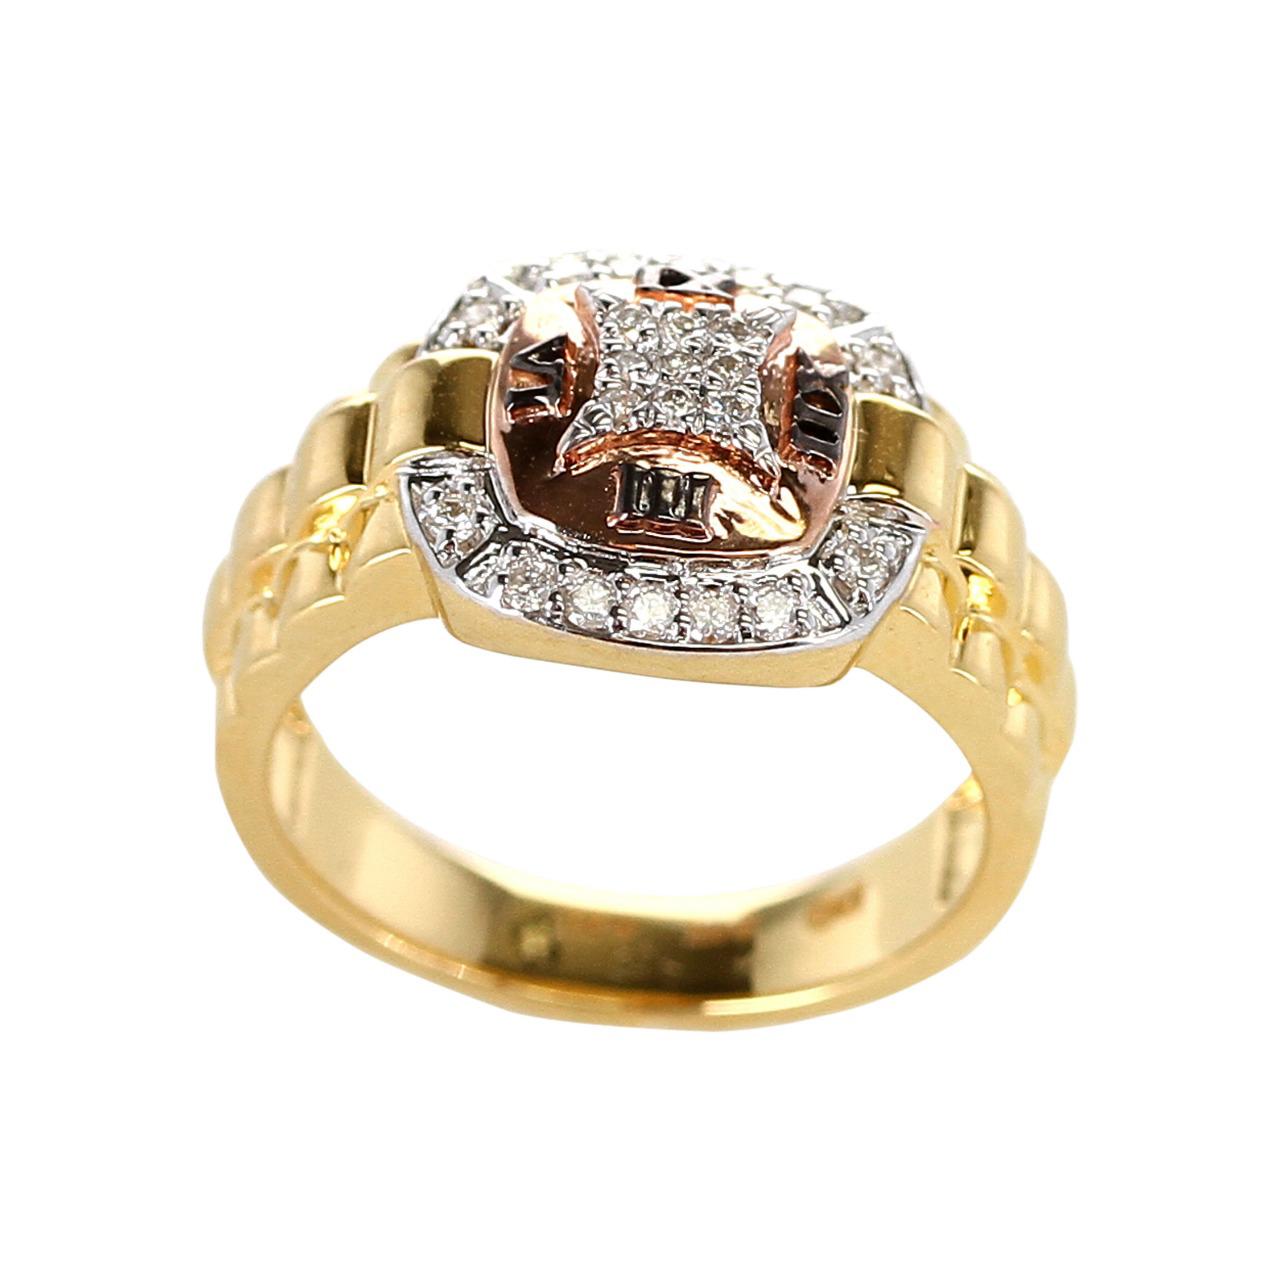 Round Cut Diamond and Watch Band Style Ring, 14 Karat Yellow and Rose Gold